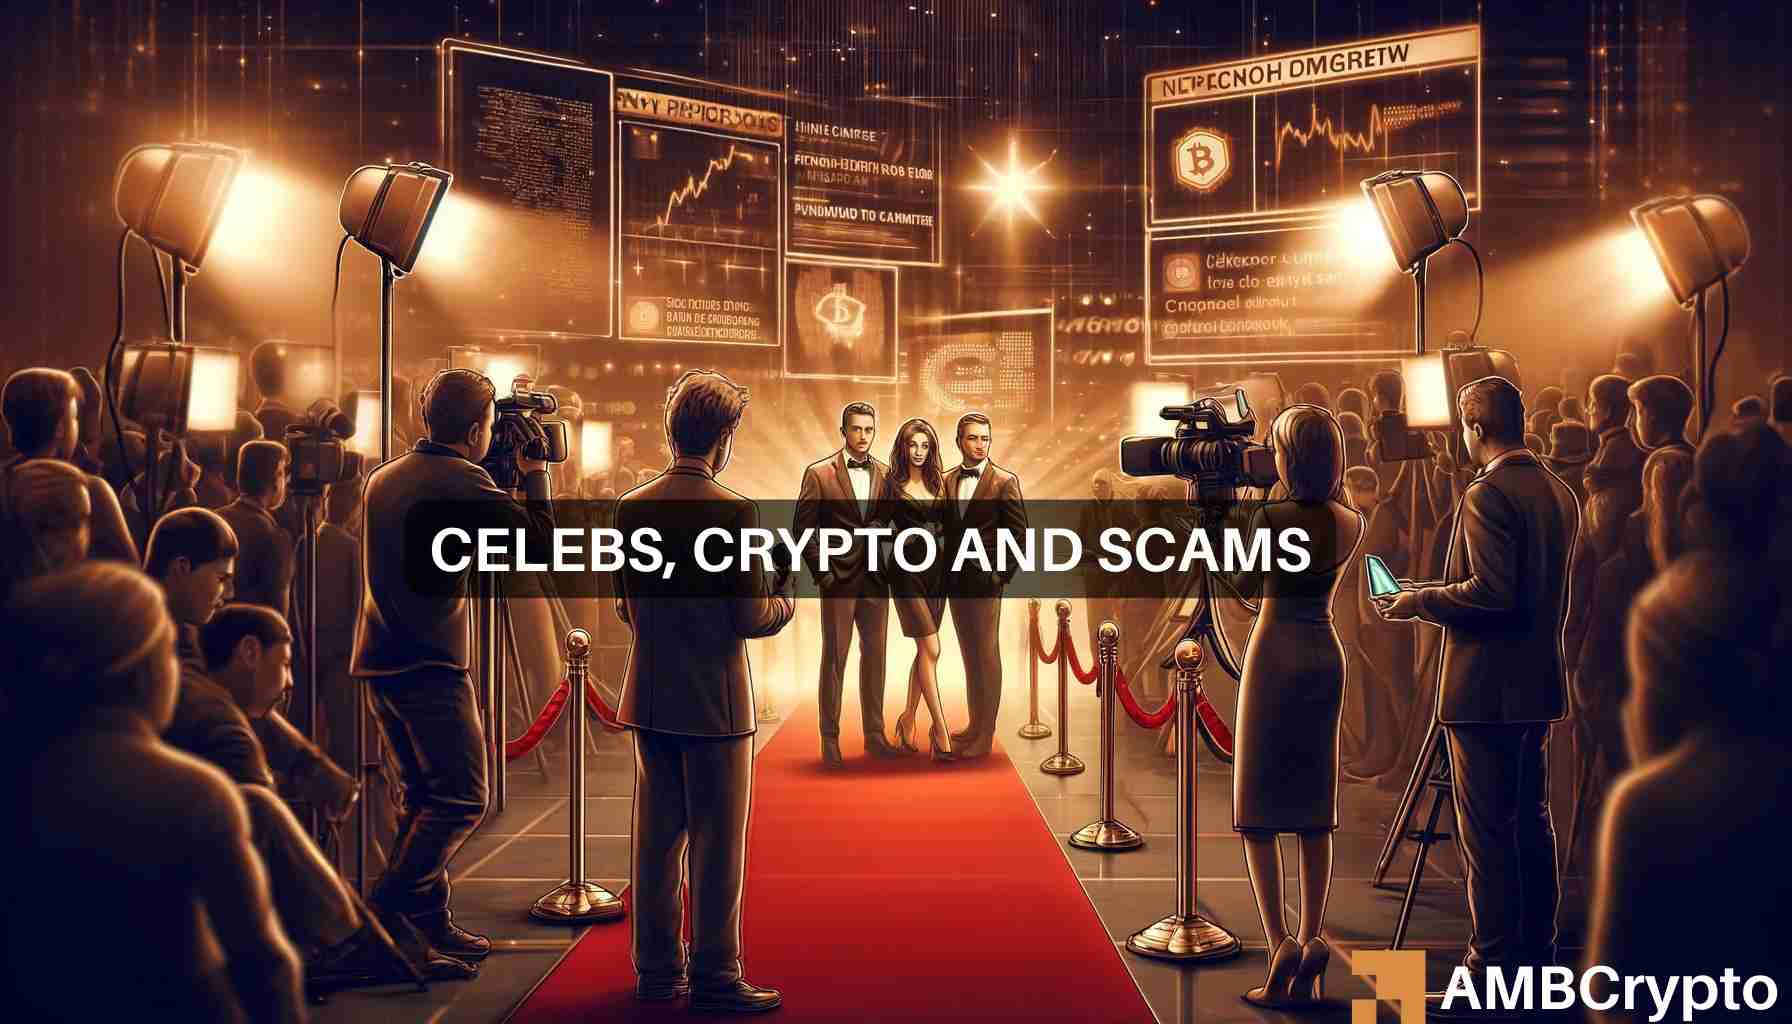 Caitlyn Jenner crypto token JENNER sparks confusion: Scam or not?